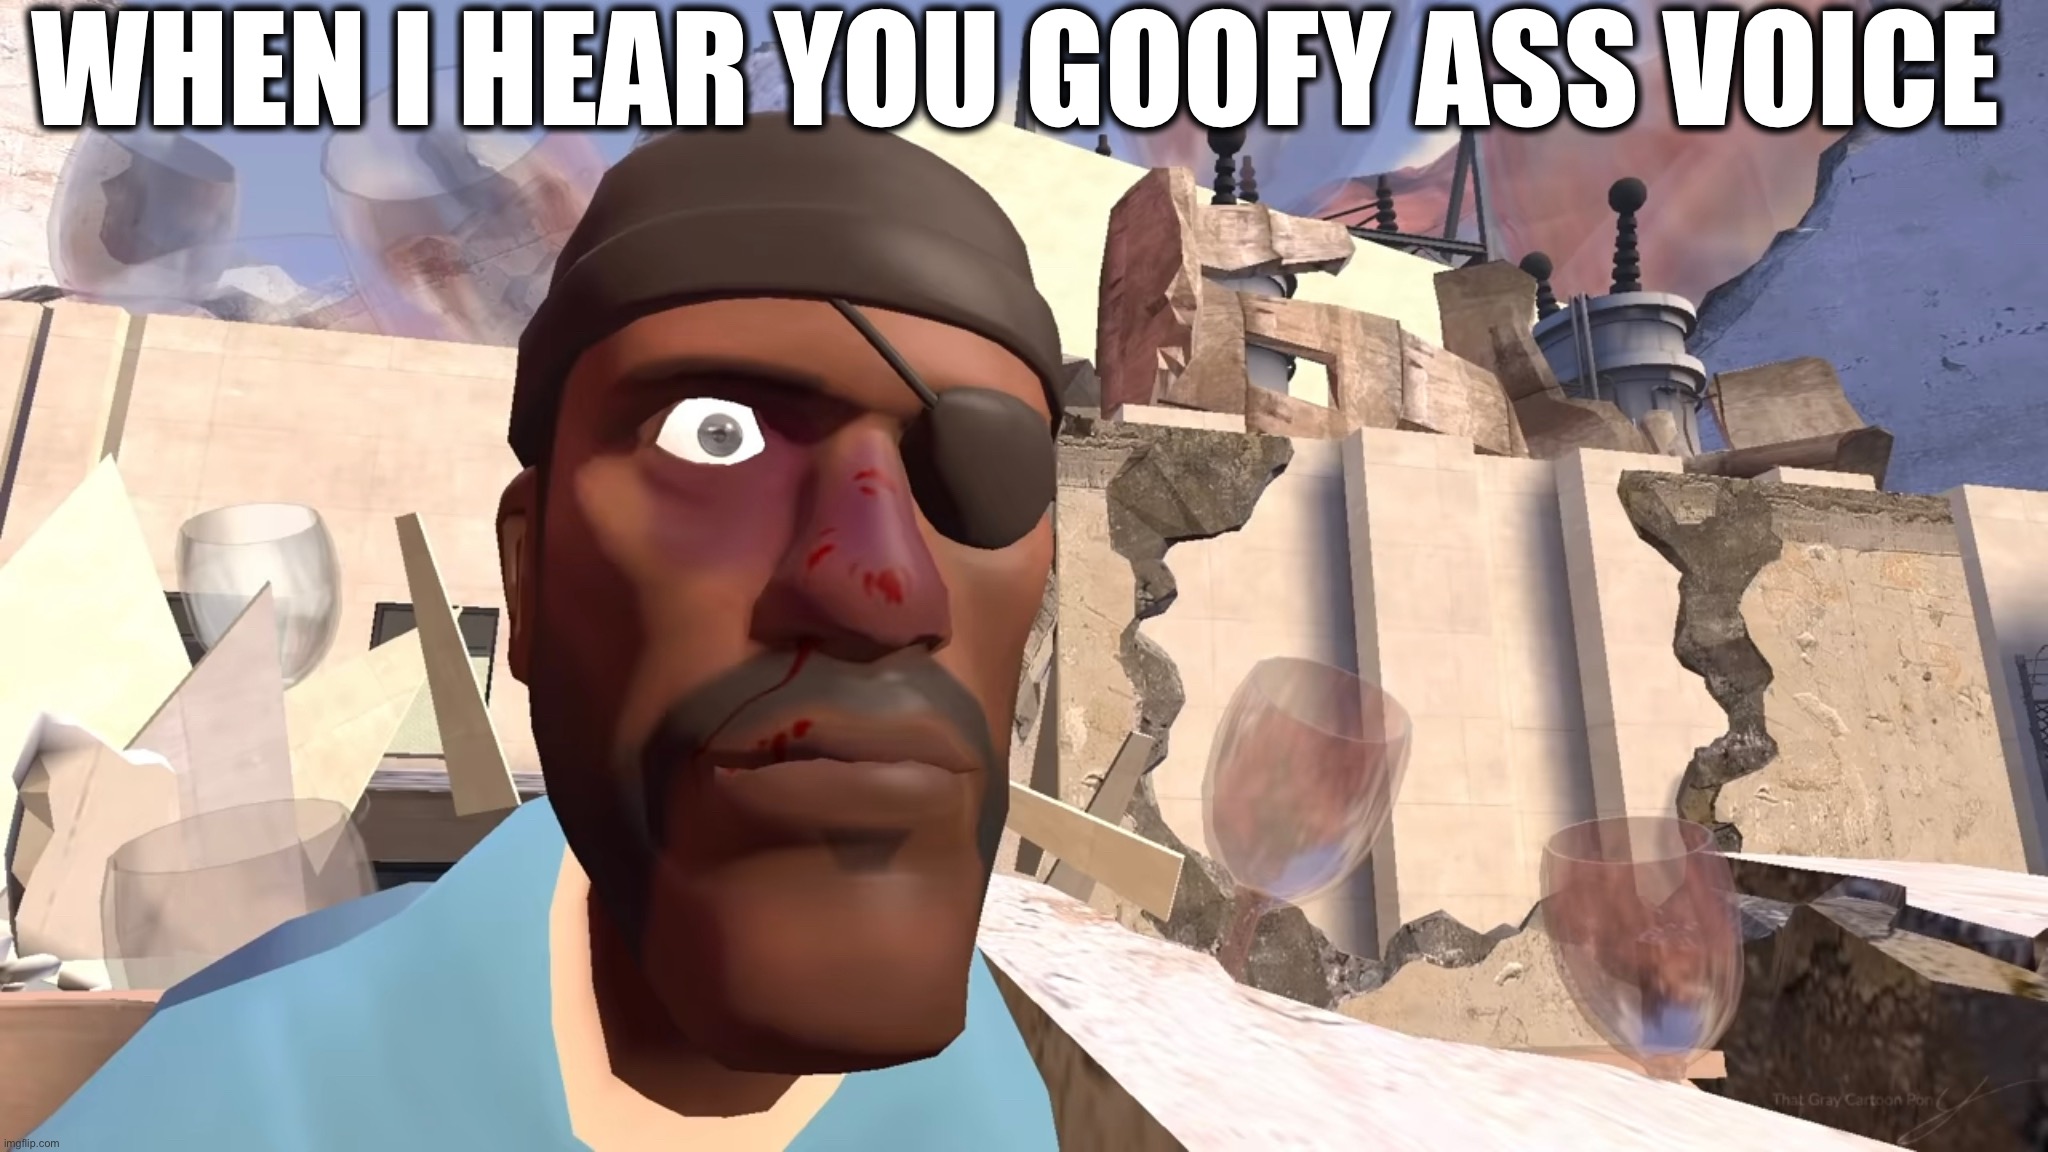 You are goofy | WHEN I HEAR YOU GOOFY ASS VOICE | image tagged in goofy | made w/ Imgflip meme maker